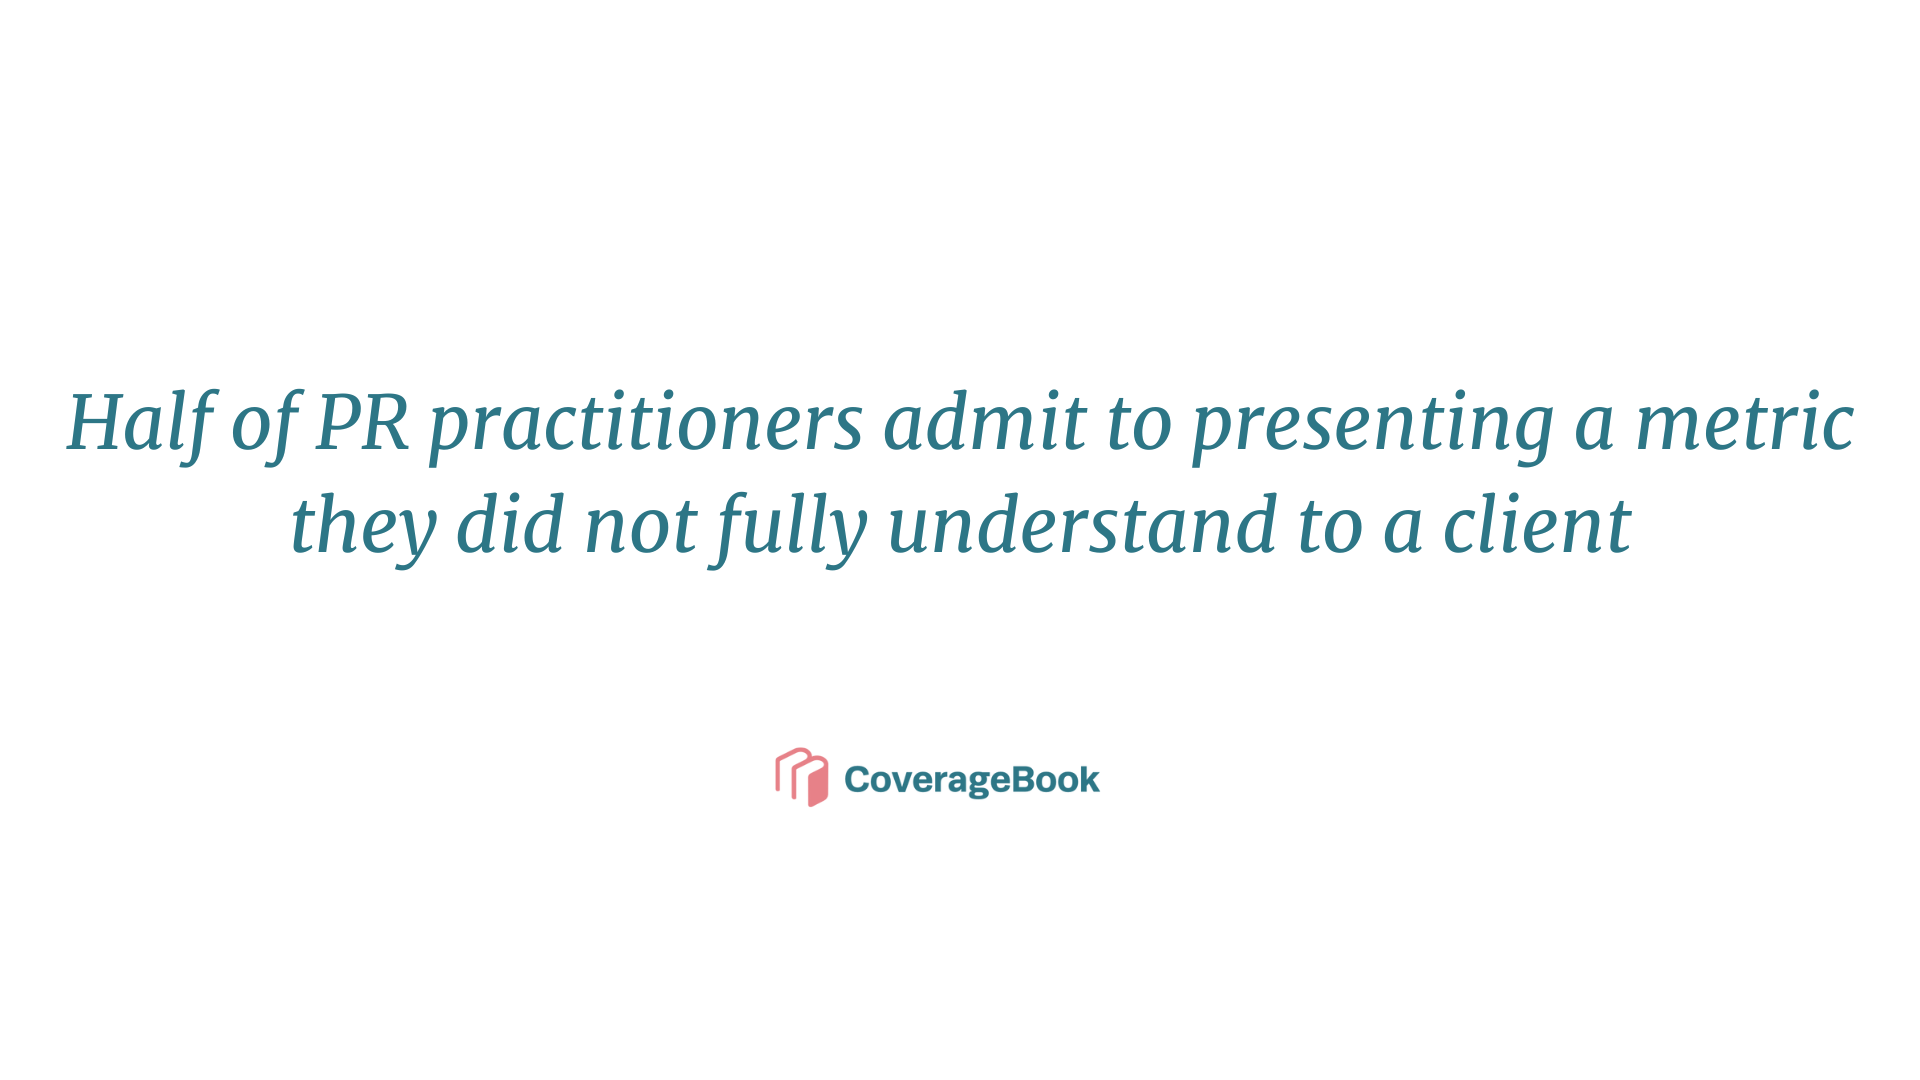 50% of PR pros admit to presenting metrics they don’t fully understand to a client